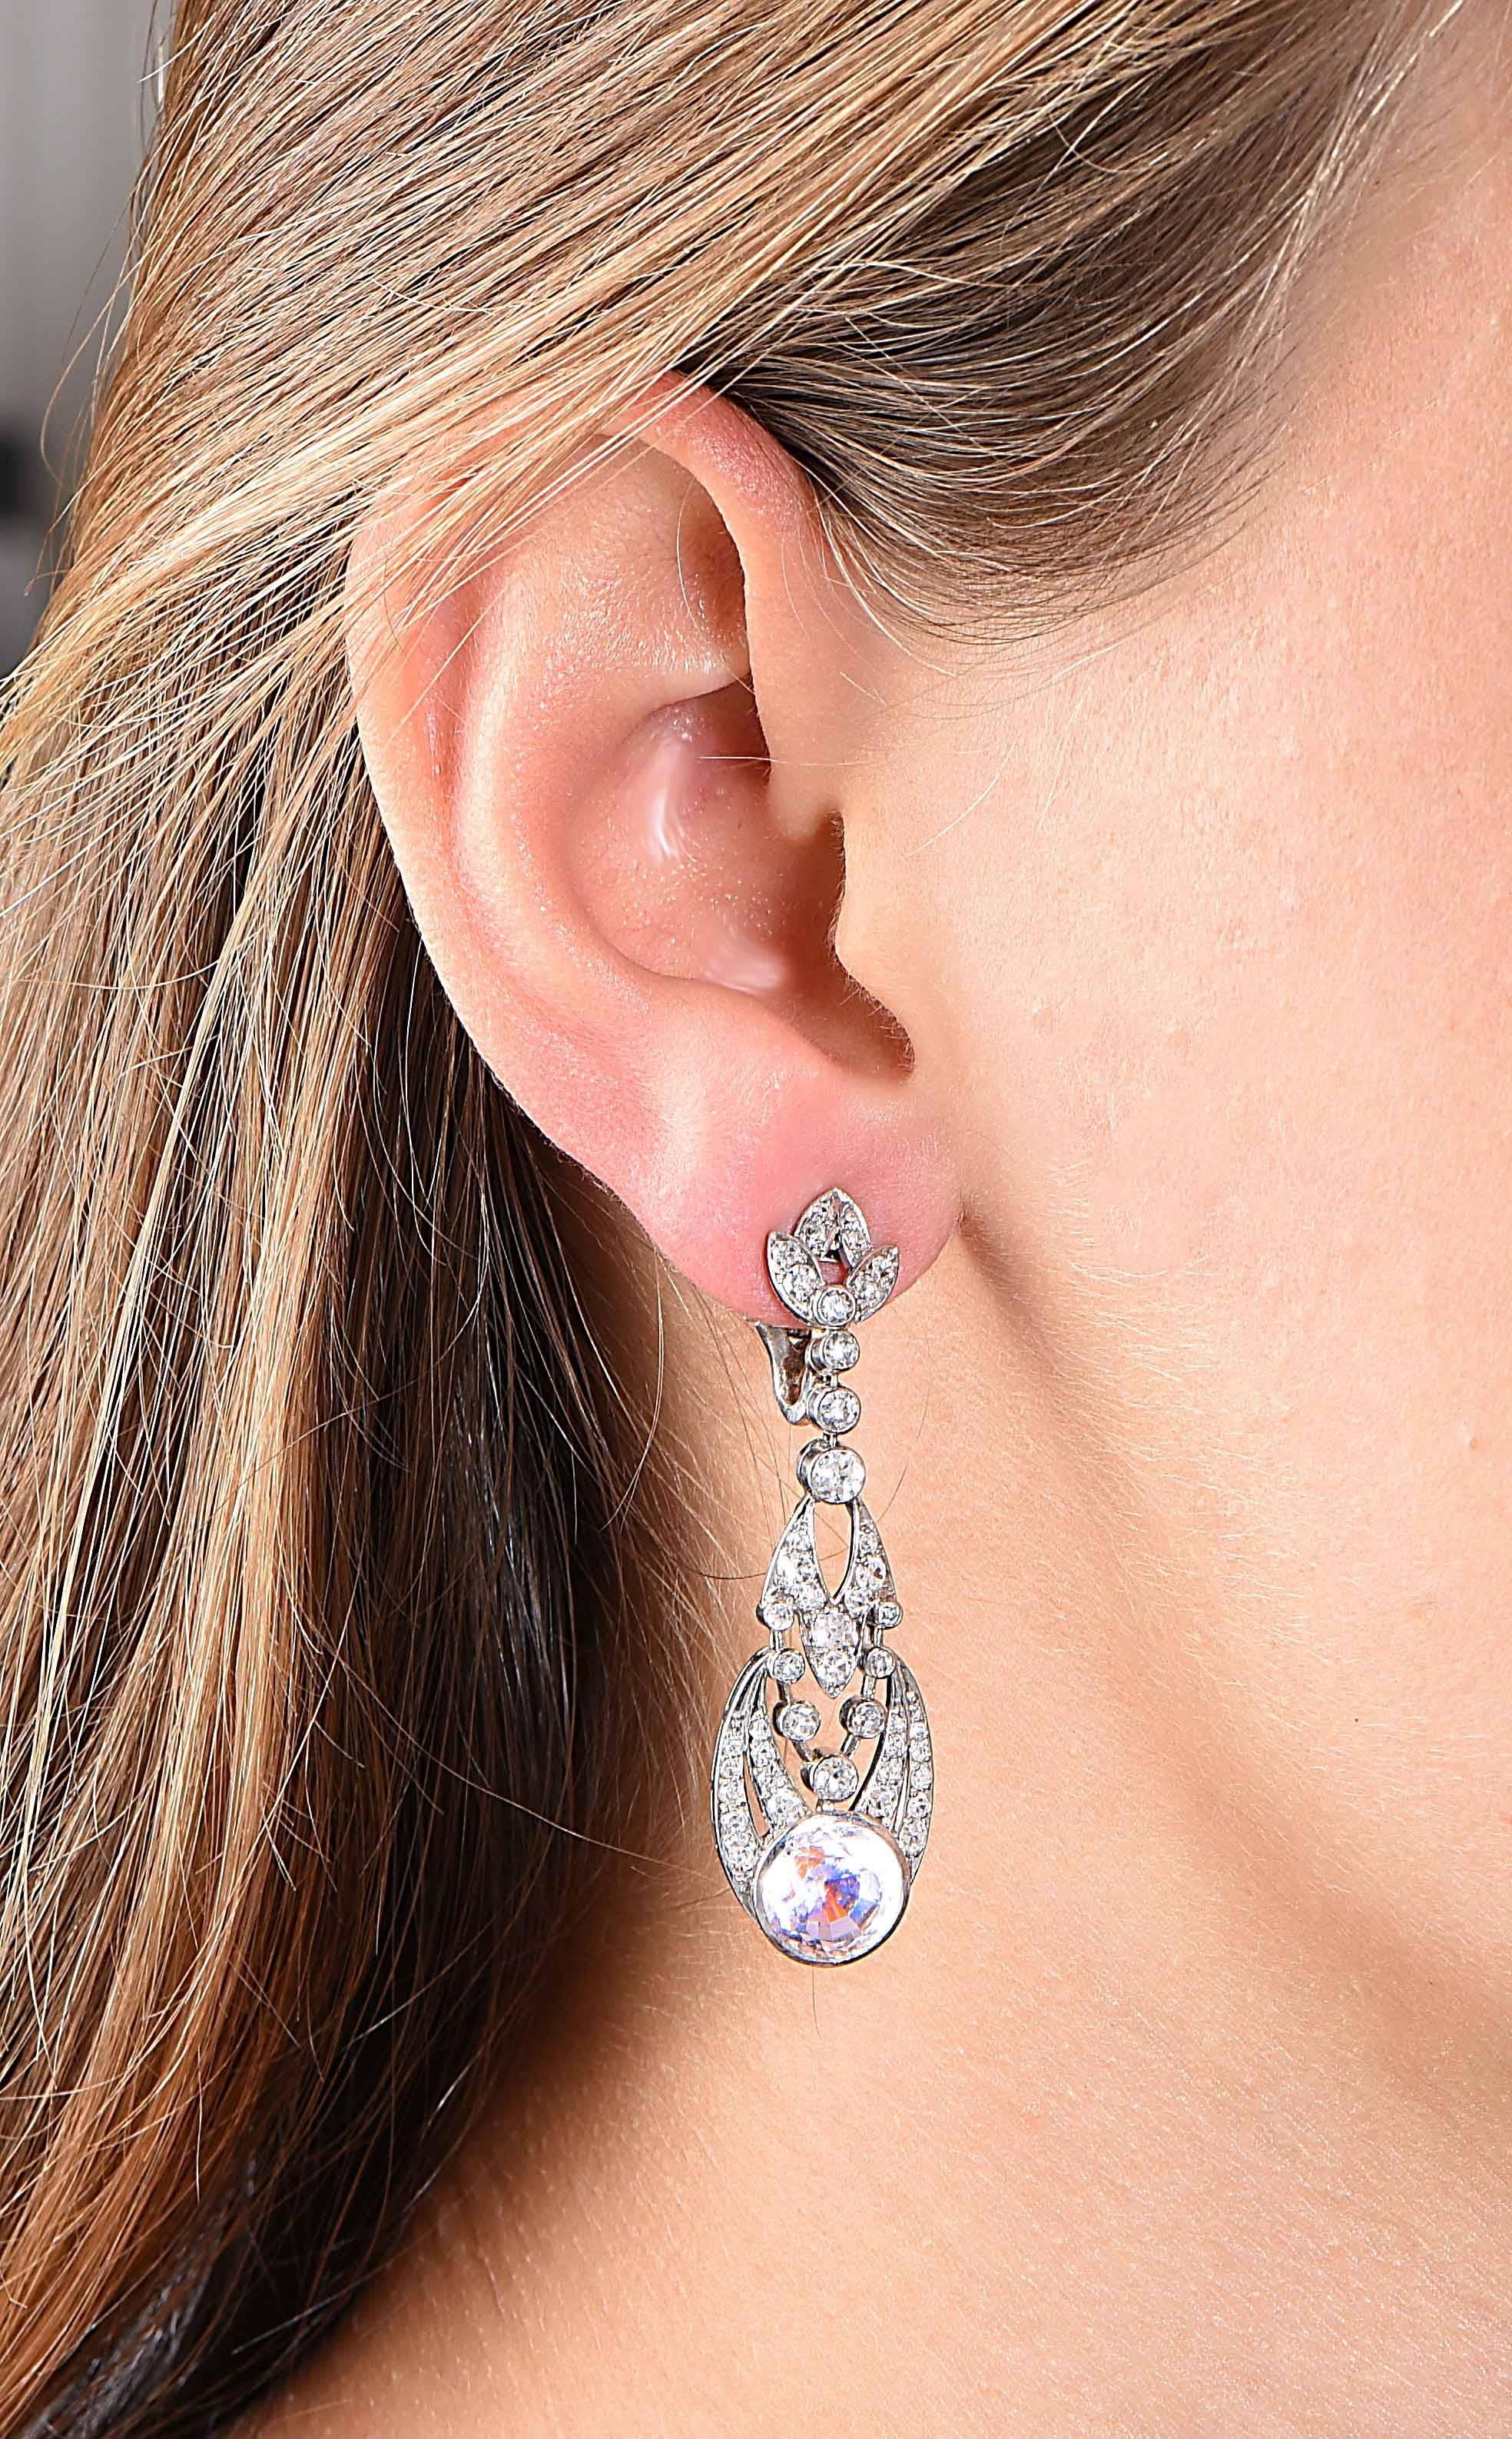 Ear-clips set with old mine and single cut diamonds, leading to large round rose quartz on the bottoms. Ear-clips are flexible.

Metal Type: Platinum Tested or Stamped
Metal Weight: 12.6 Grams